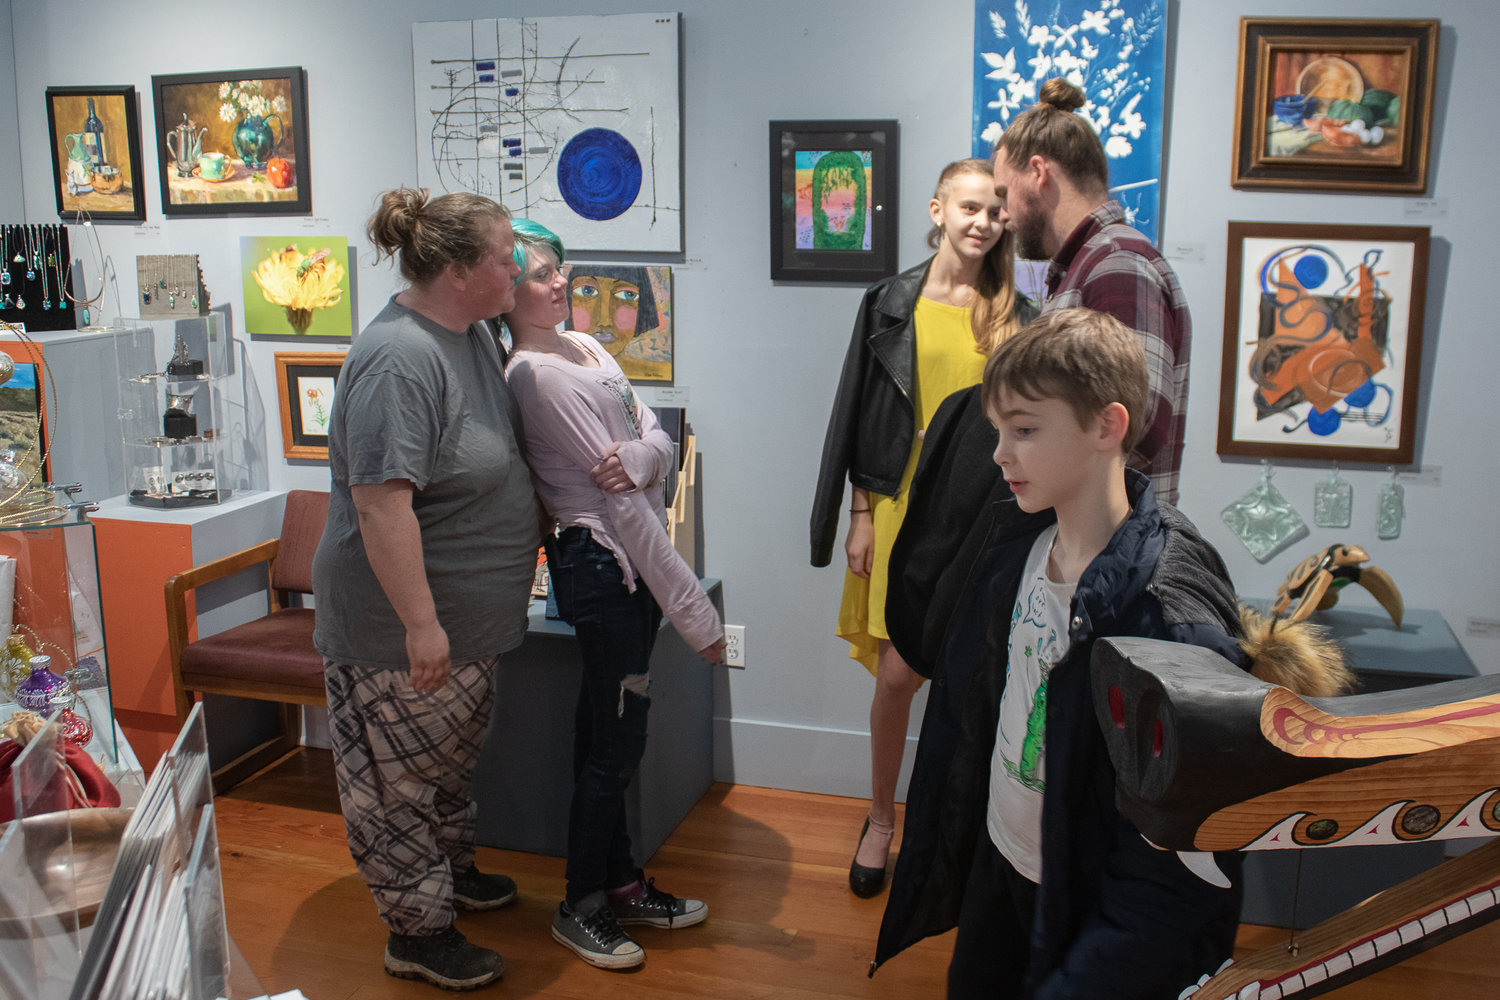 Visitors tour the gallery this past Friday for the emerging artists gala at the Rectangle Gallery & Creative Space located at 209 N. Tower Ave. in downtown Centralia.